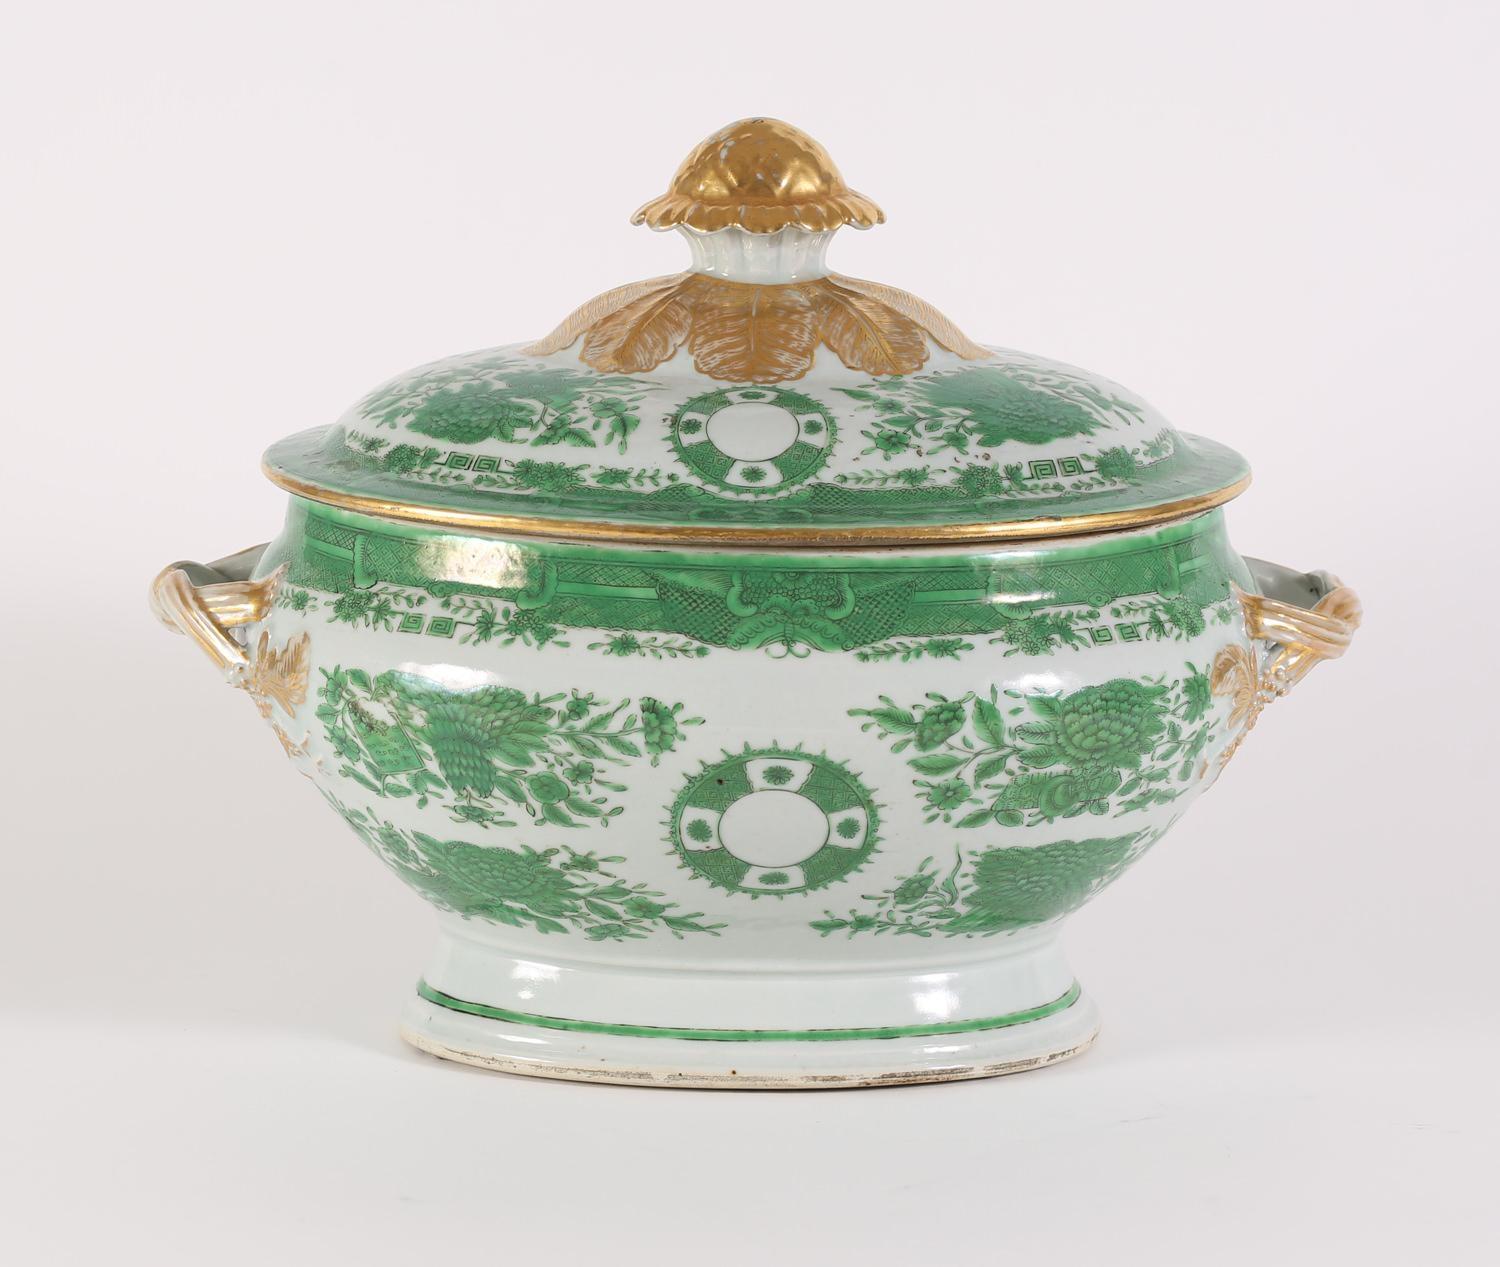 Chinese export porcelain Fitzhugh pattern tureen, cover and underplate, 18th century. Very Unusual and rare pattern, beautifully hand painted in green enamels and 24-karat gold, having rope twisted handles.

Measures: Height the tureen and cover